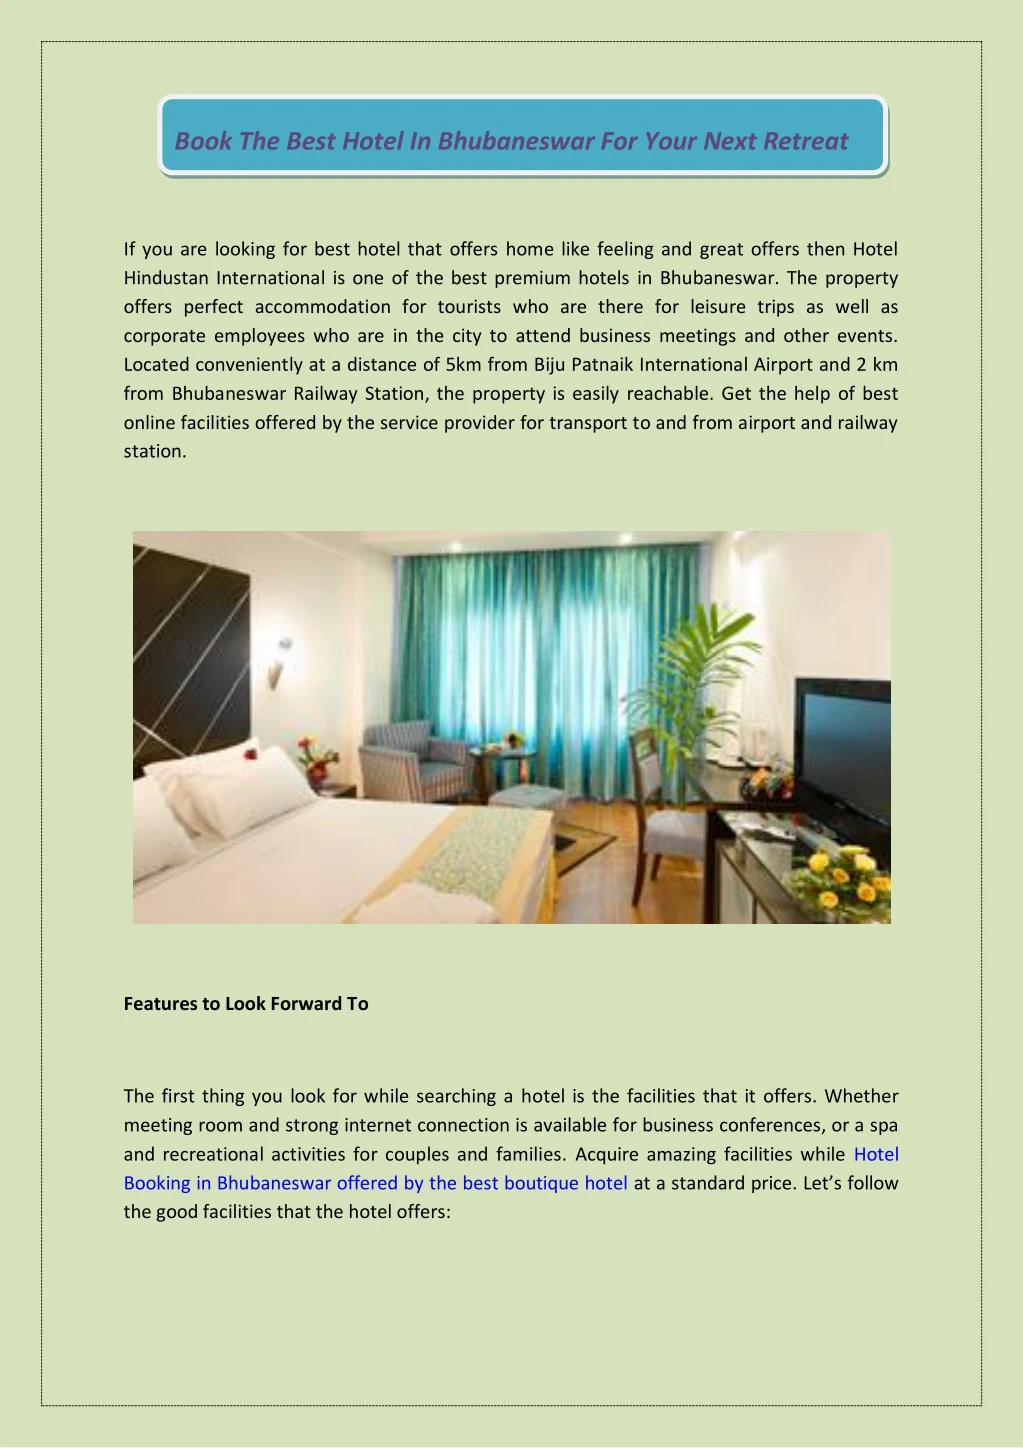 book the best hotel in bhubaneswar for your next